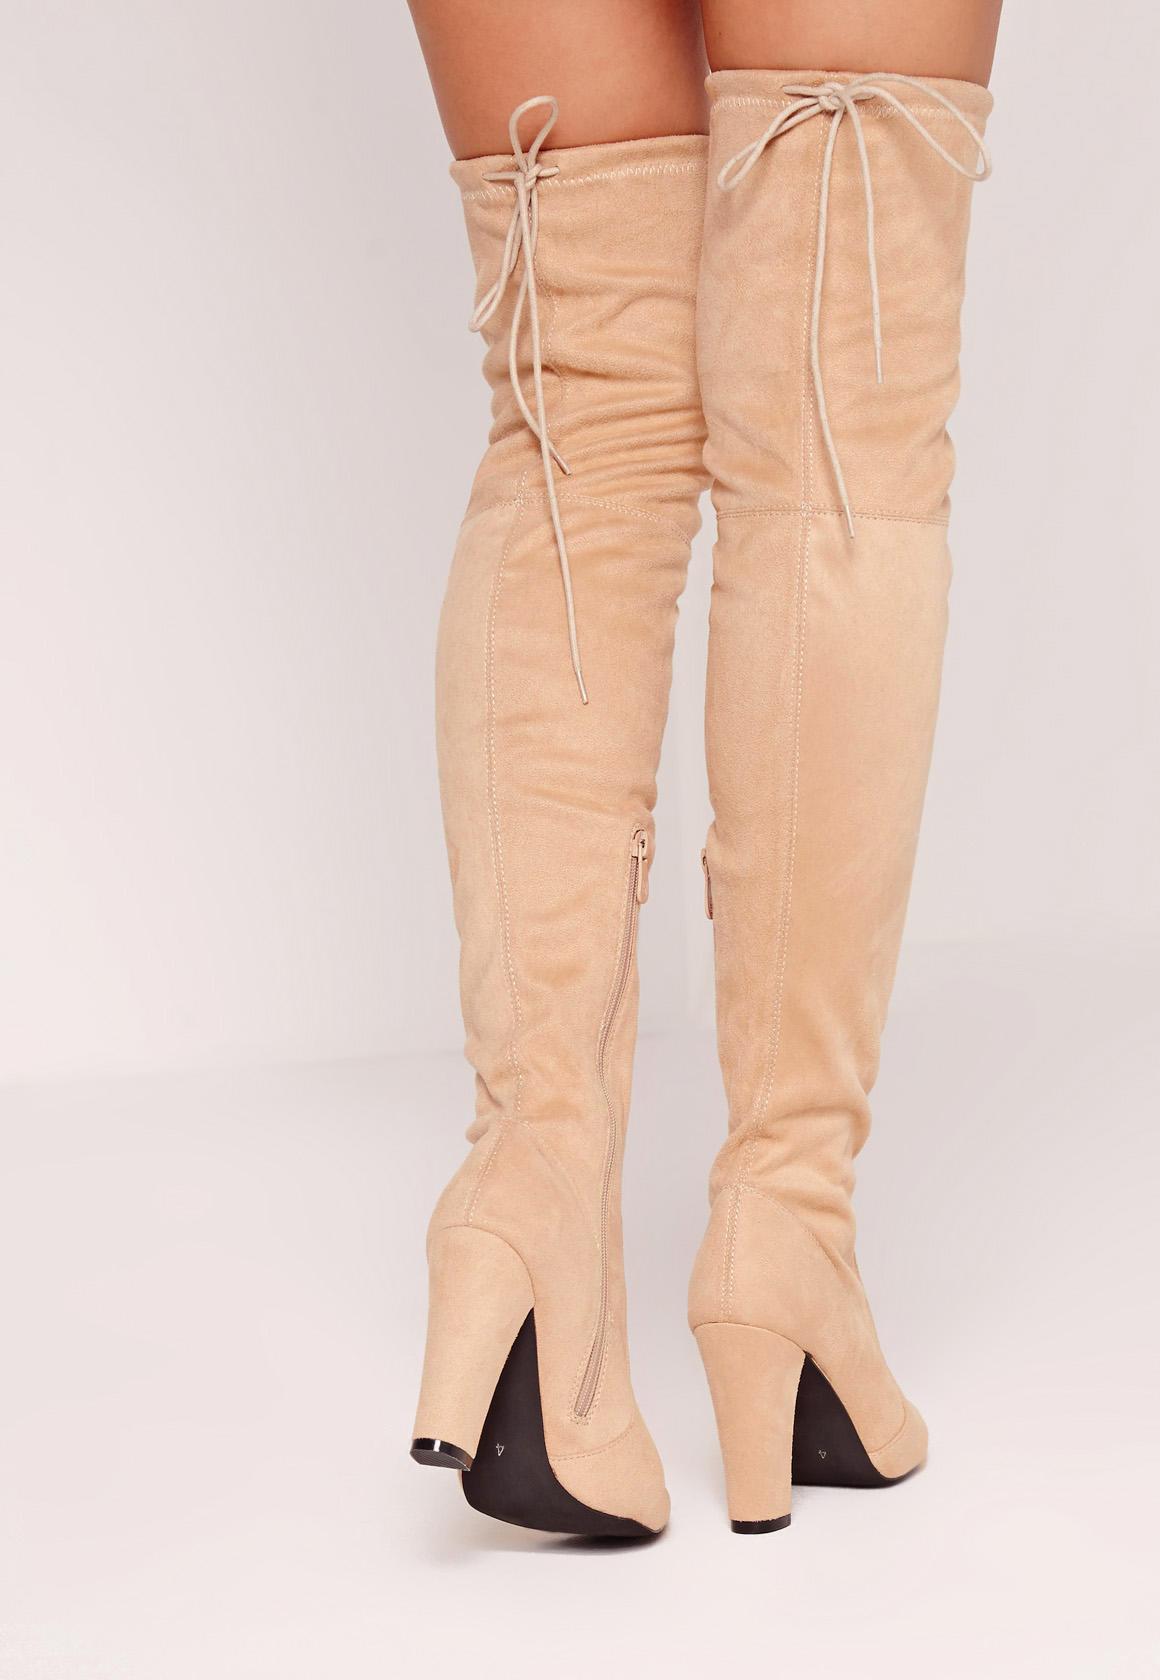 Lyst Missguided Nude Faux Suede Over The Knee Heeled Boots In Blue